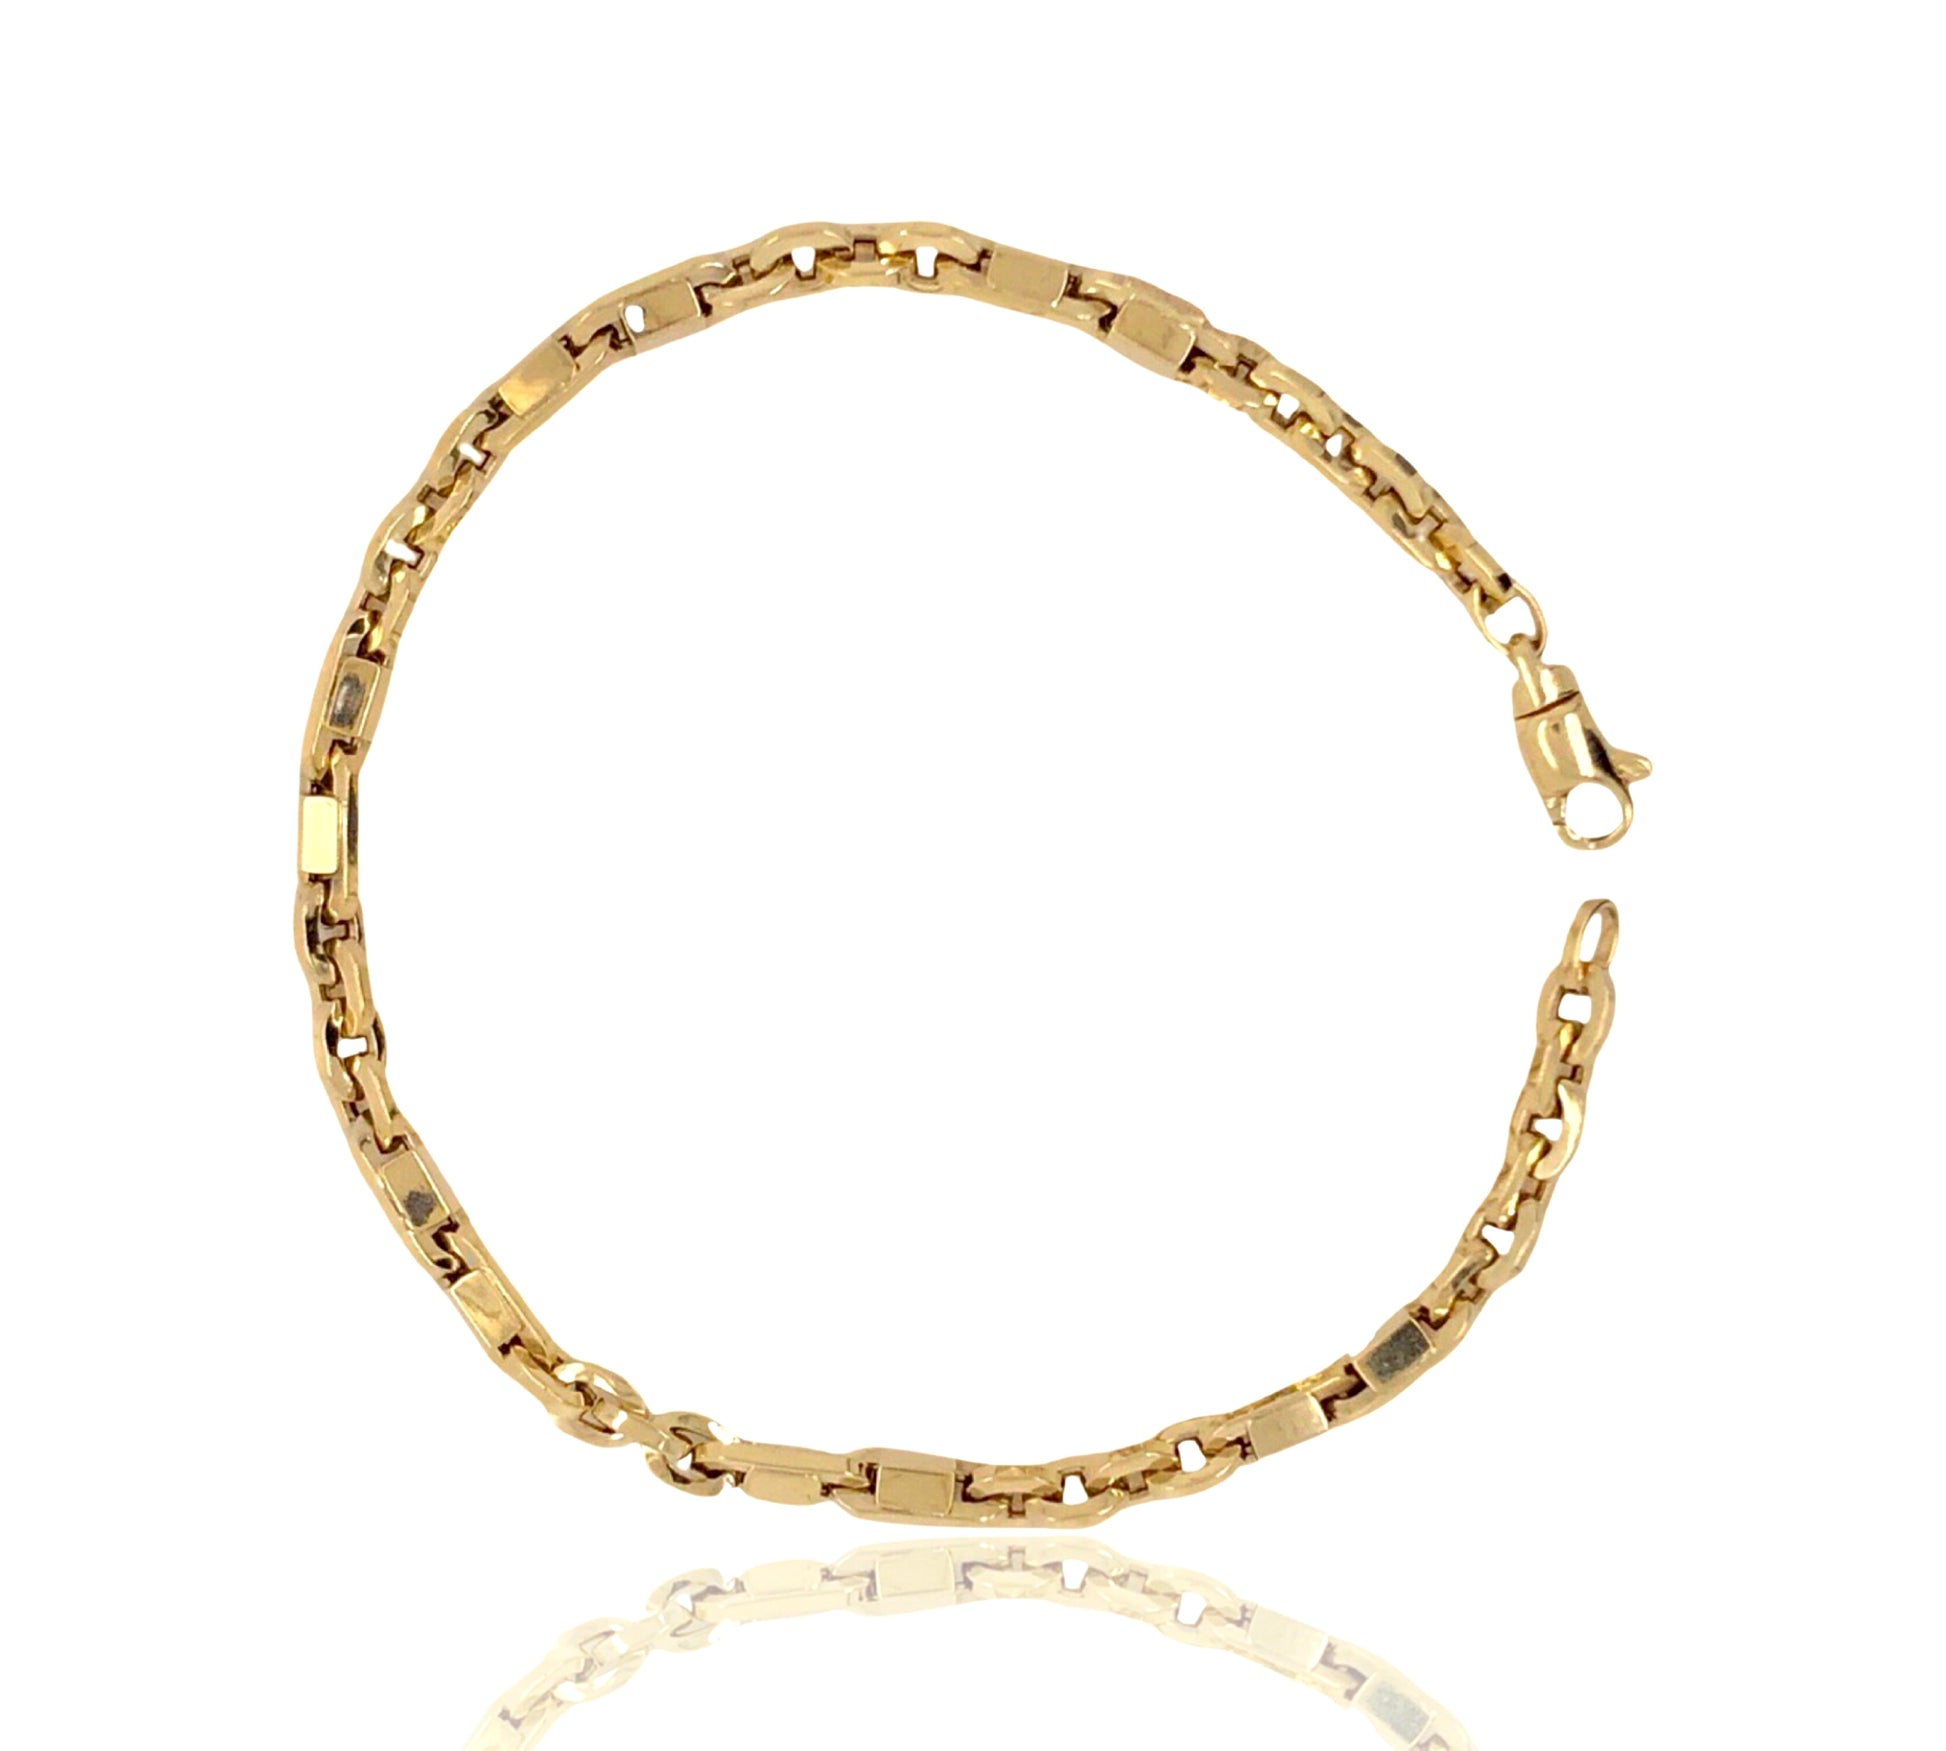 10K Solid Yellow Gold Cable Link Bracelet (4.5MM)